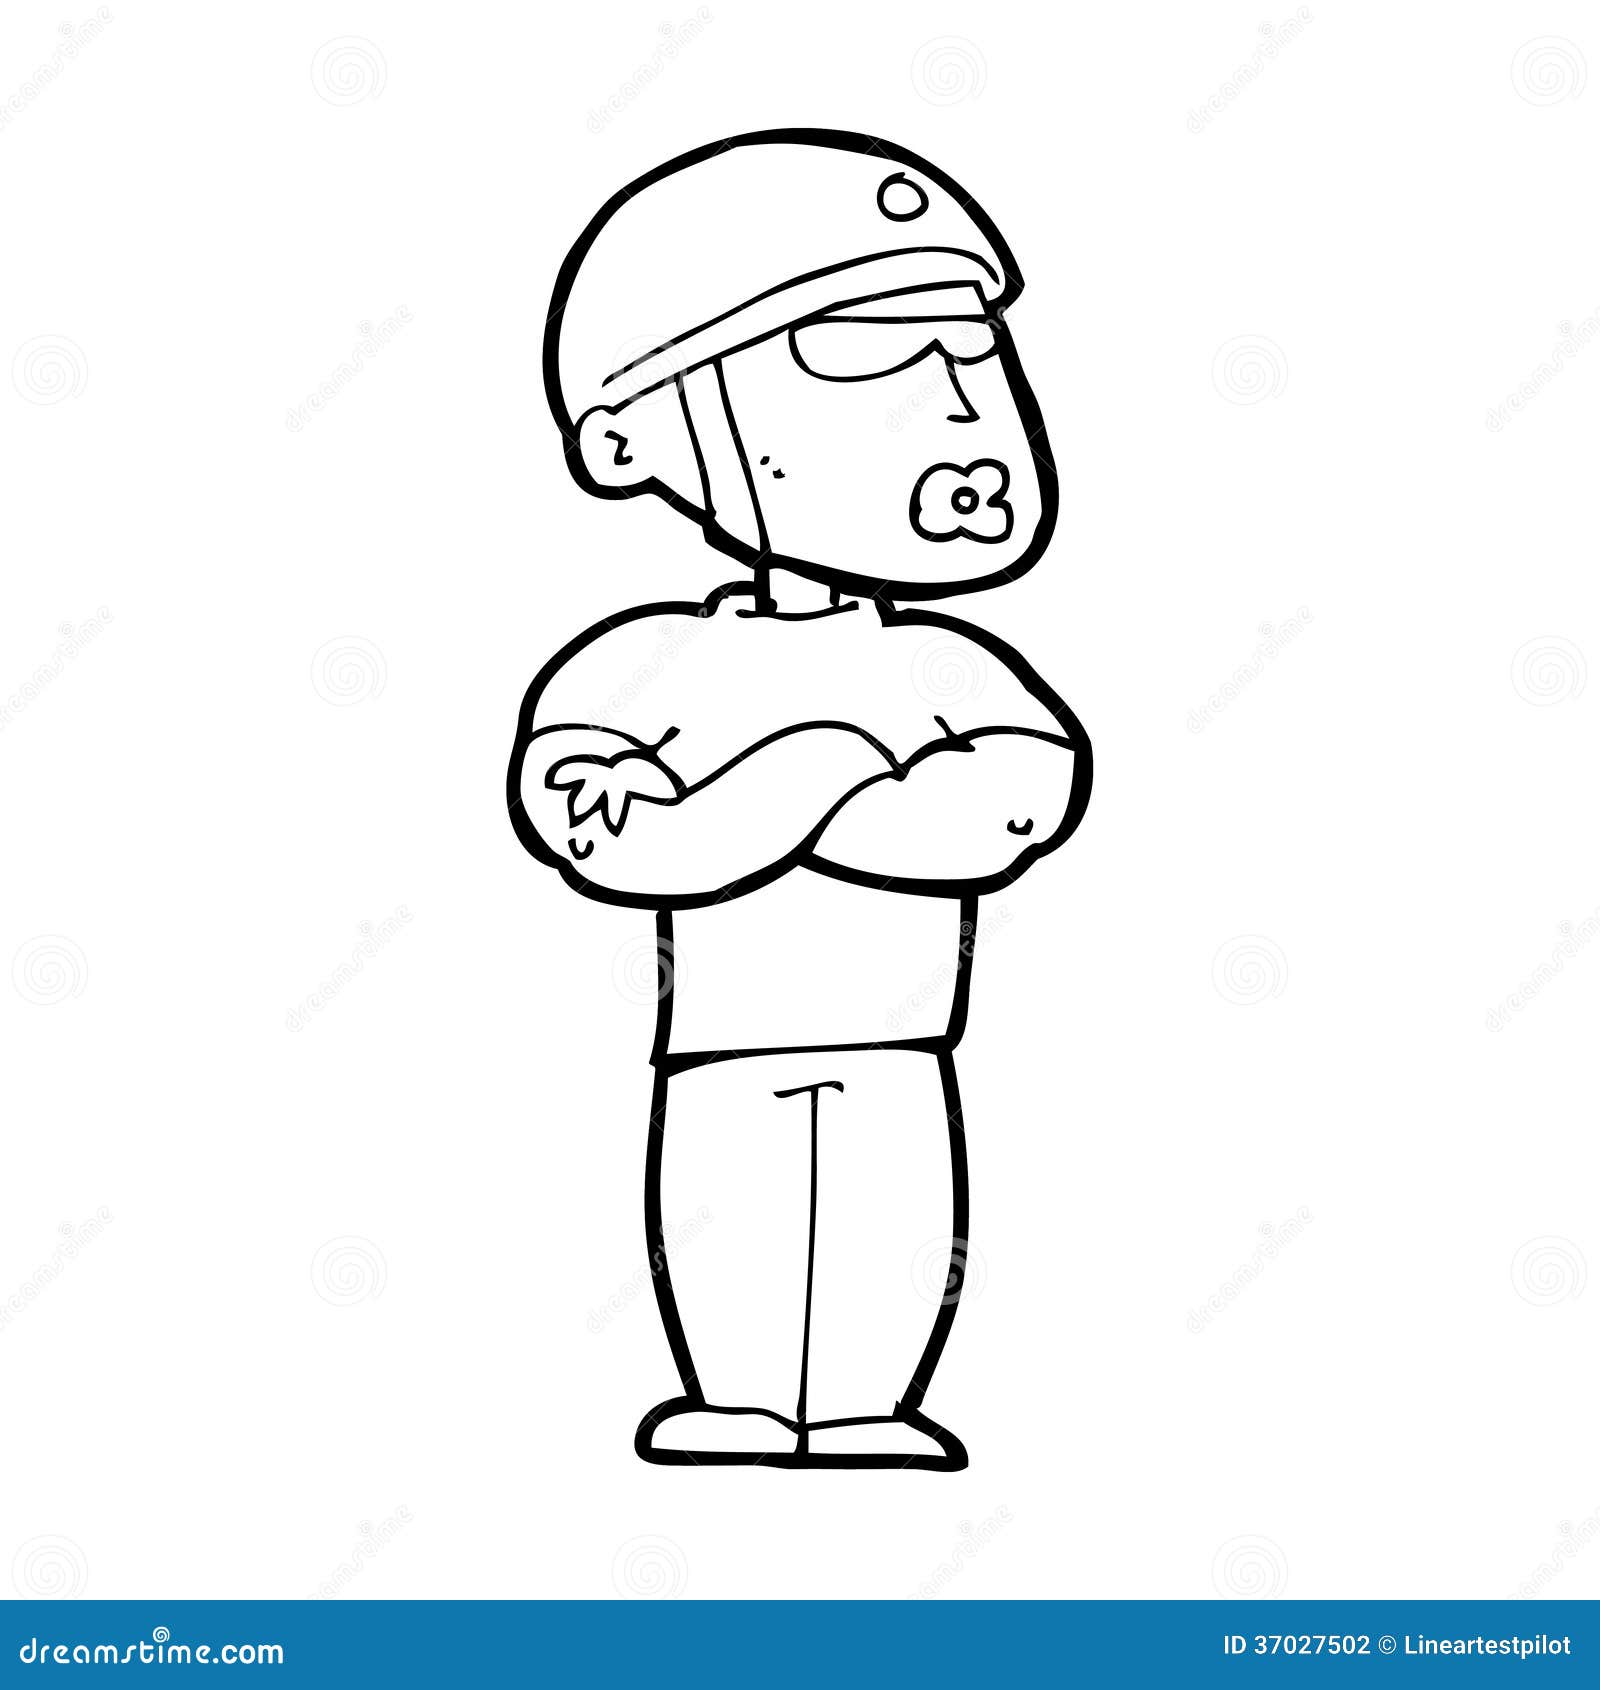 security guard clipart black and white - photo #12